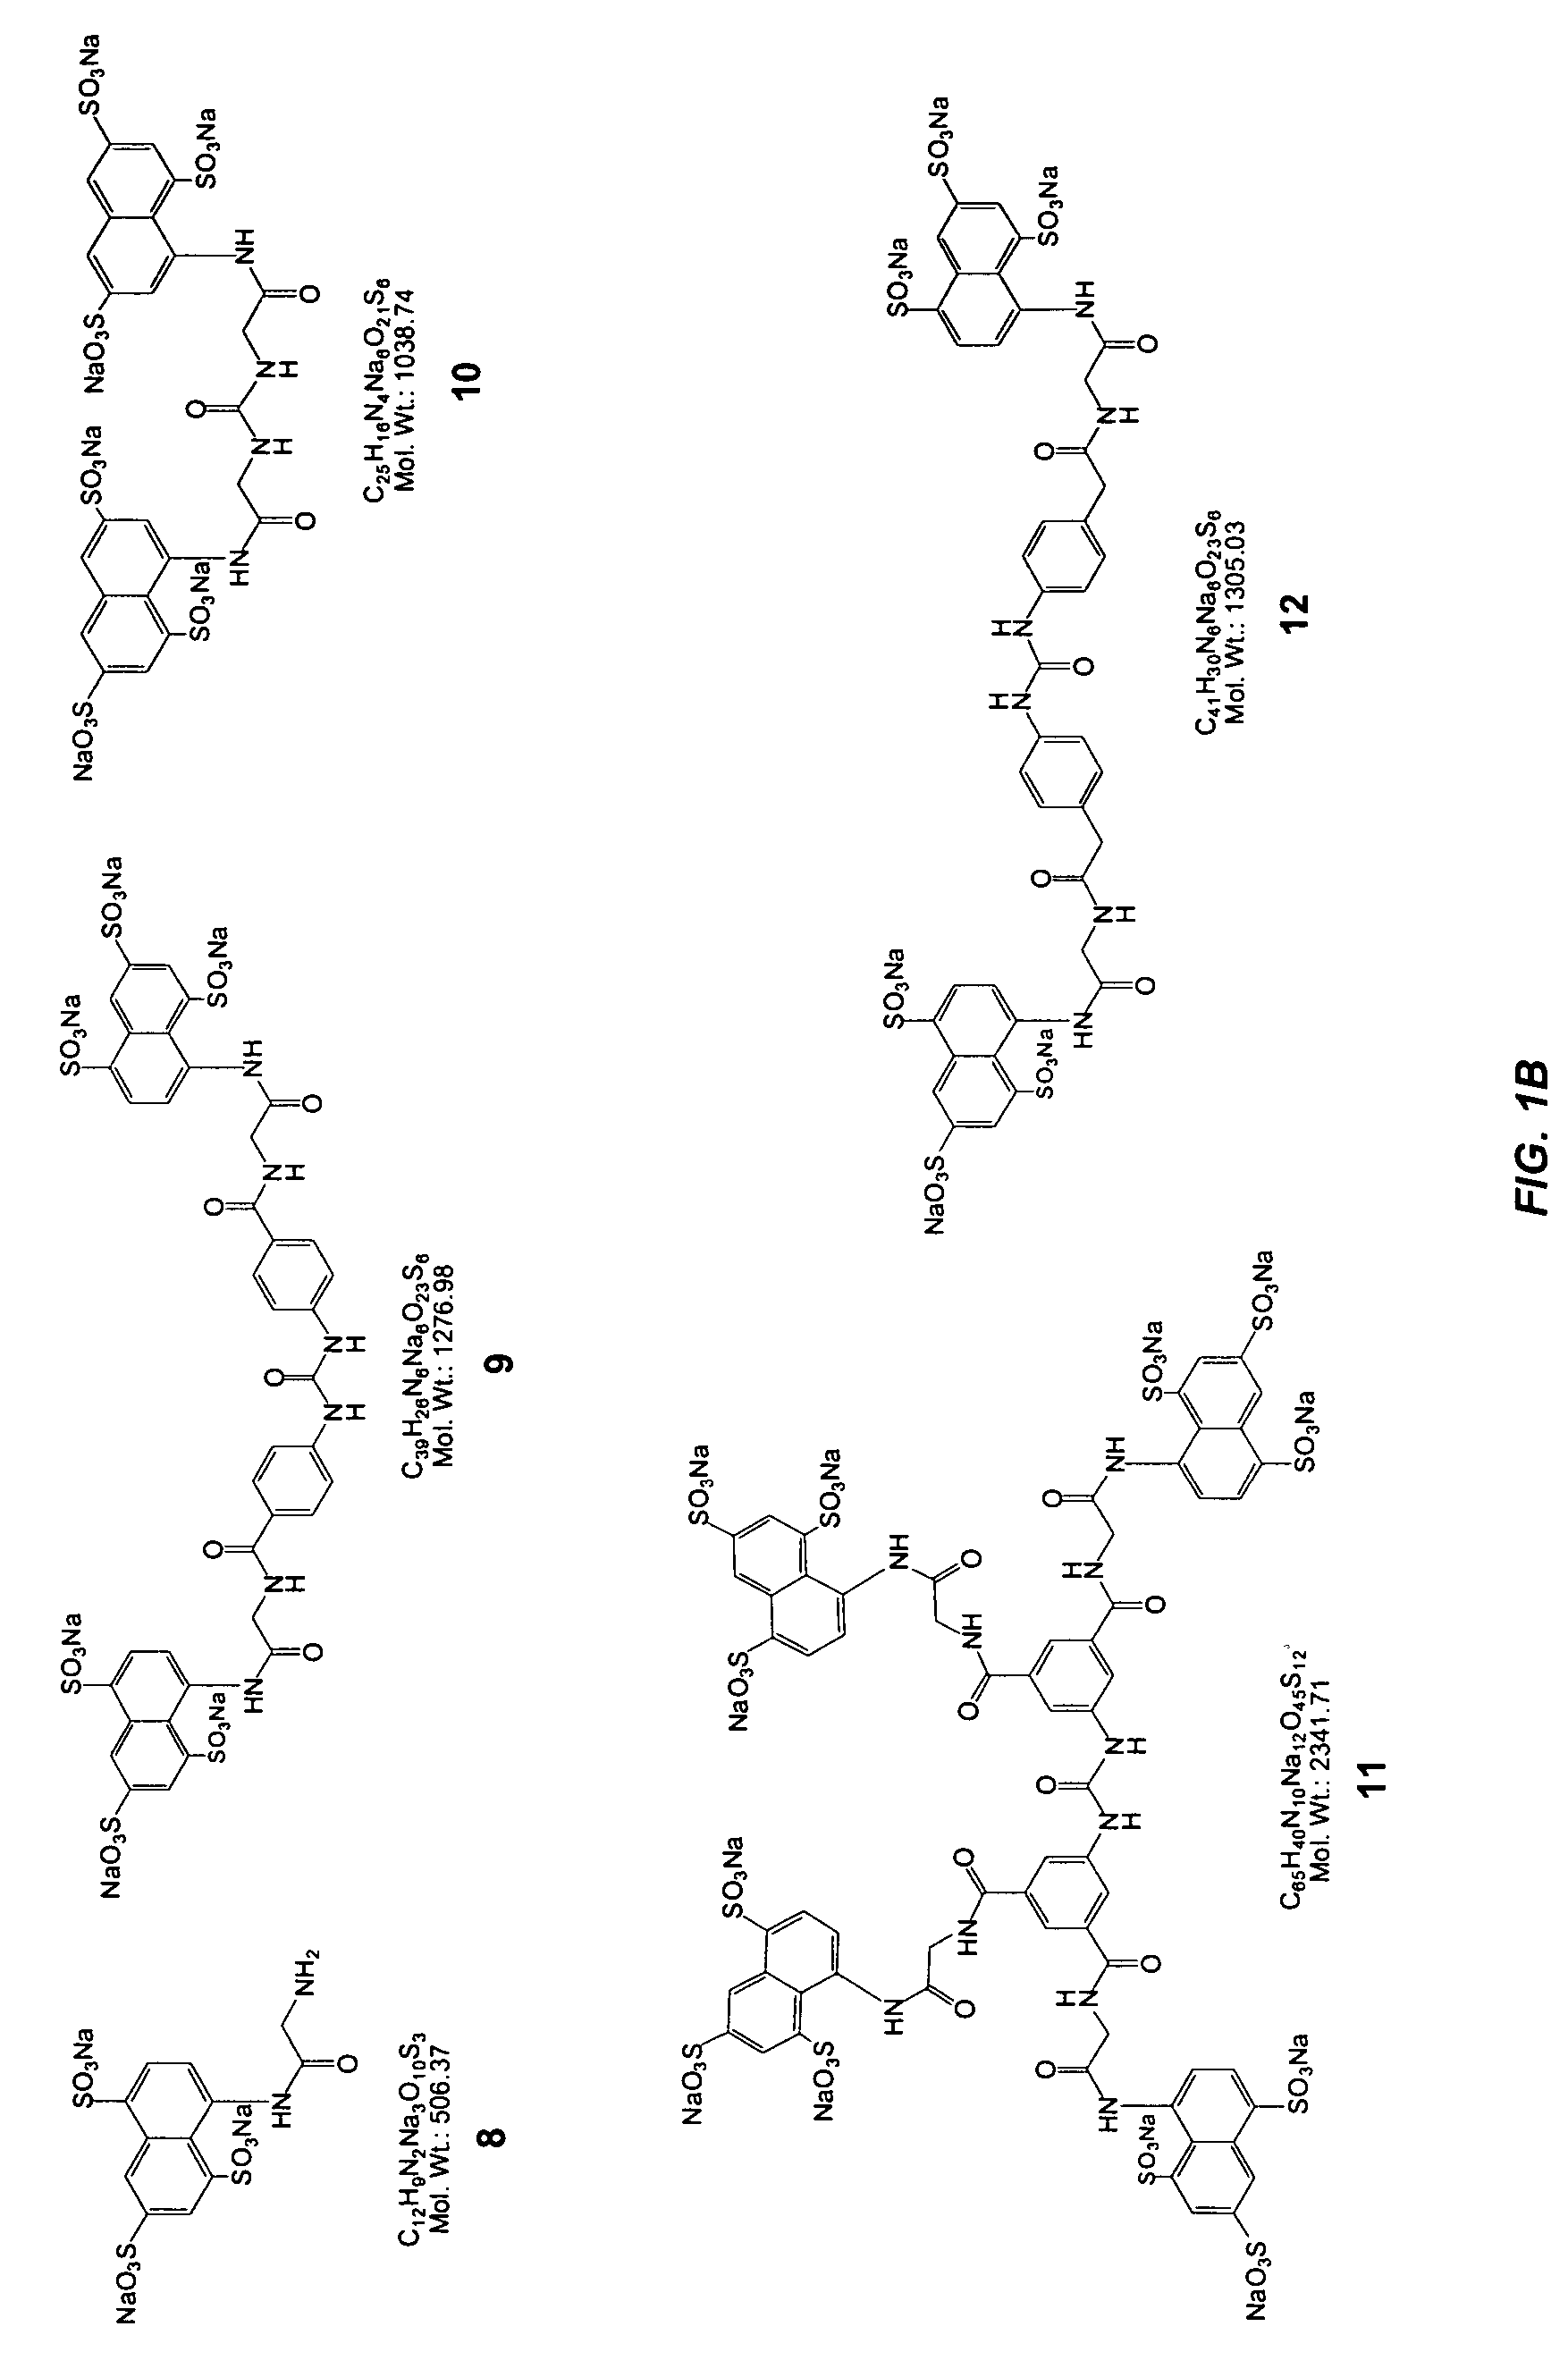 Compounds and methods for inhibiting selectin-mediated function